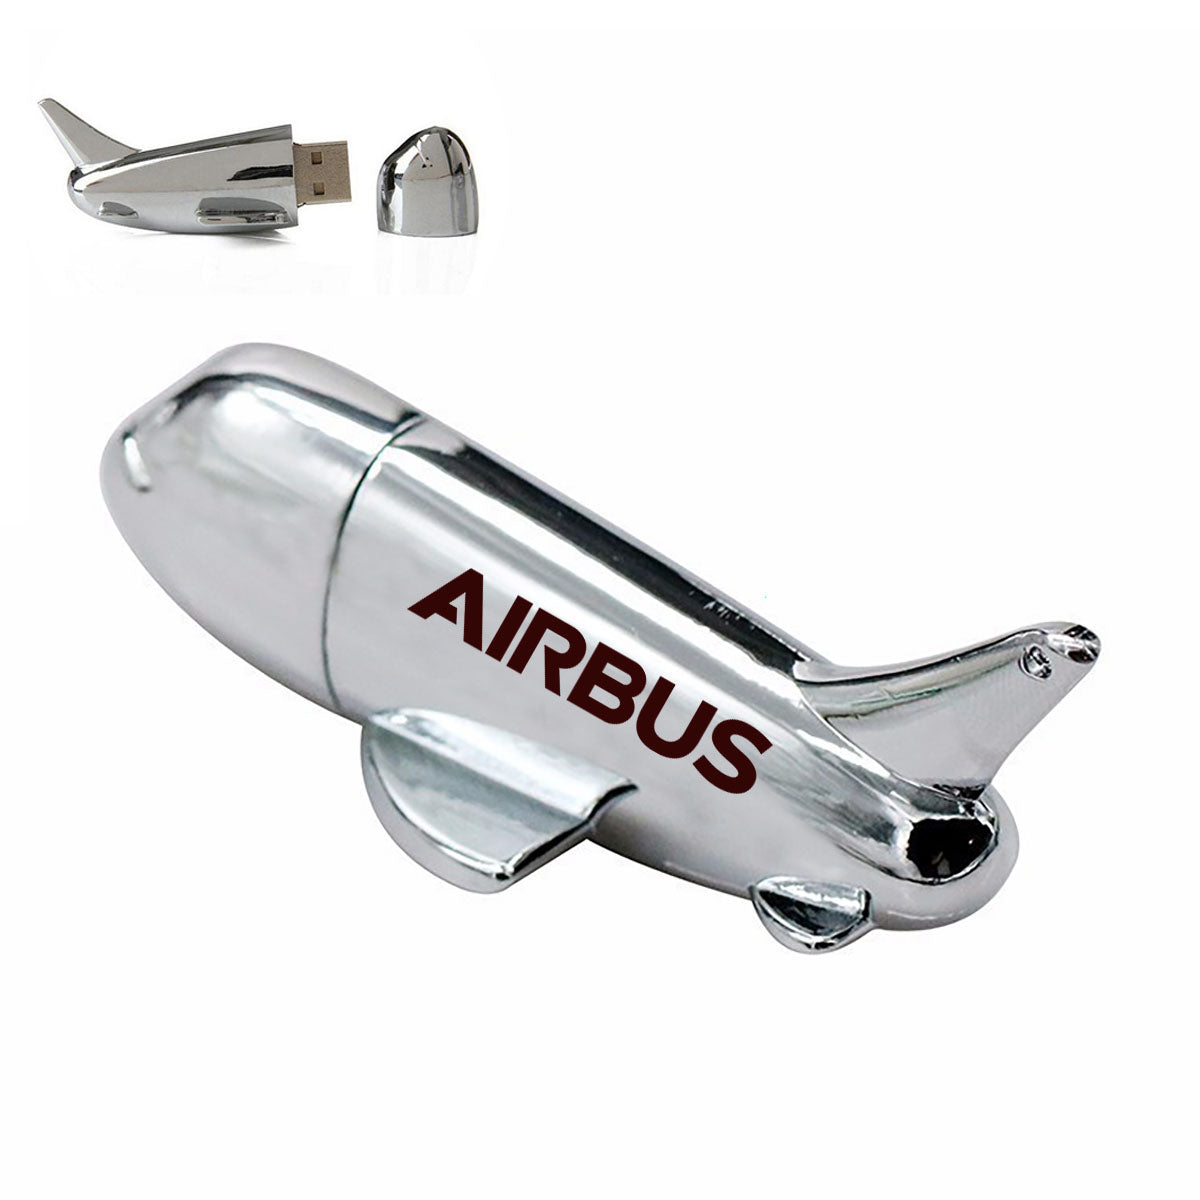 Airbus & Text Designed Airplane Shape USB Drives